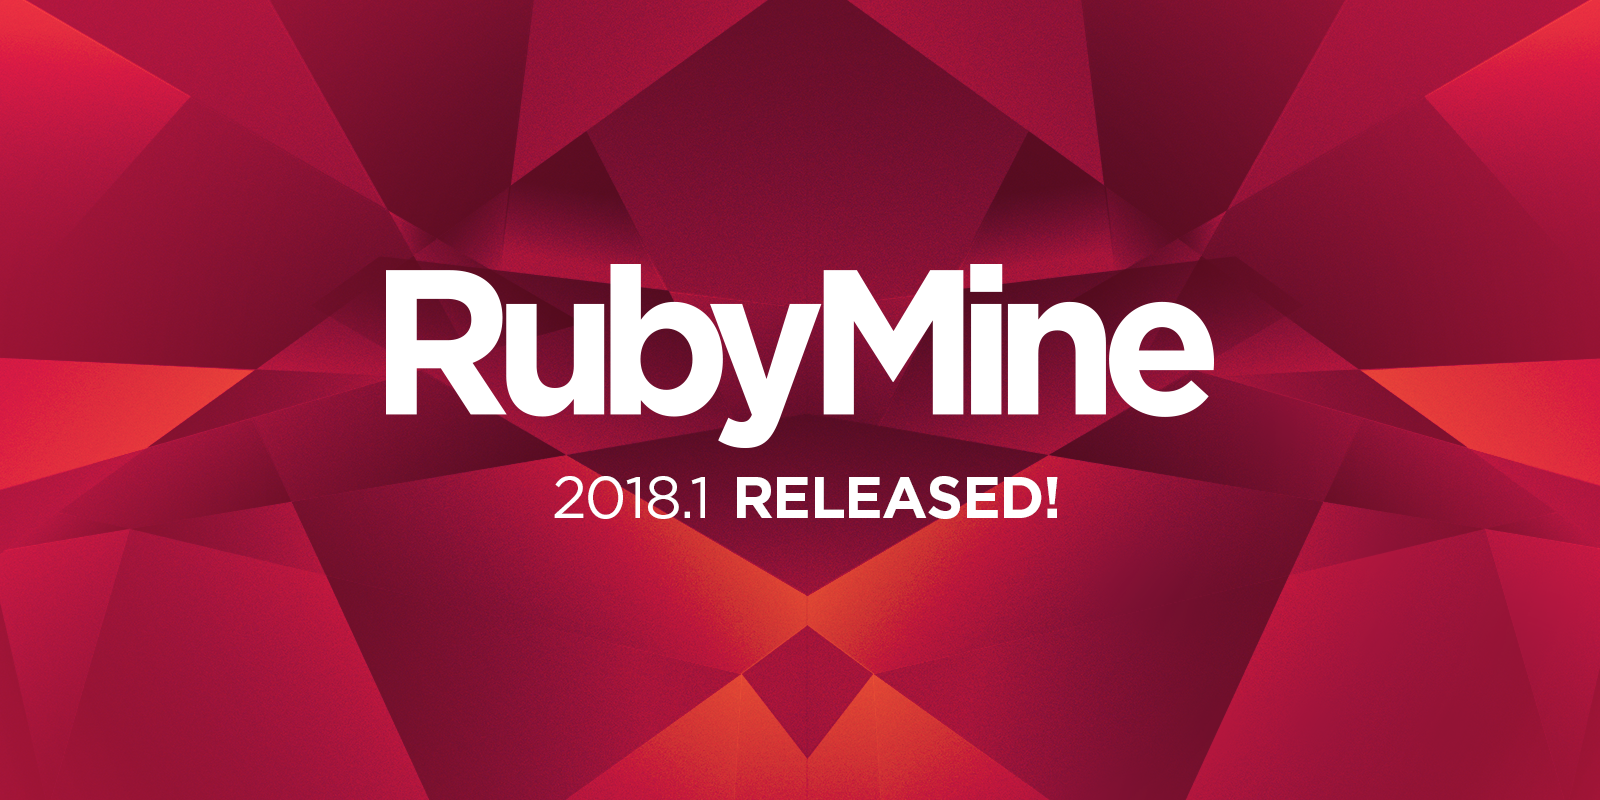 download the last version for android JetBrains RubyMine 2023.1.3